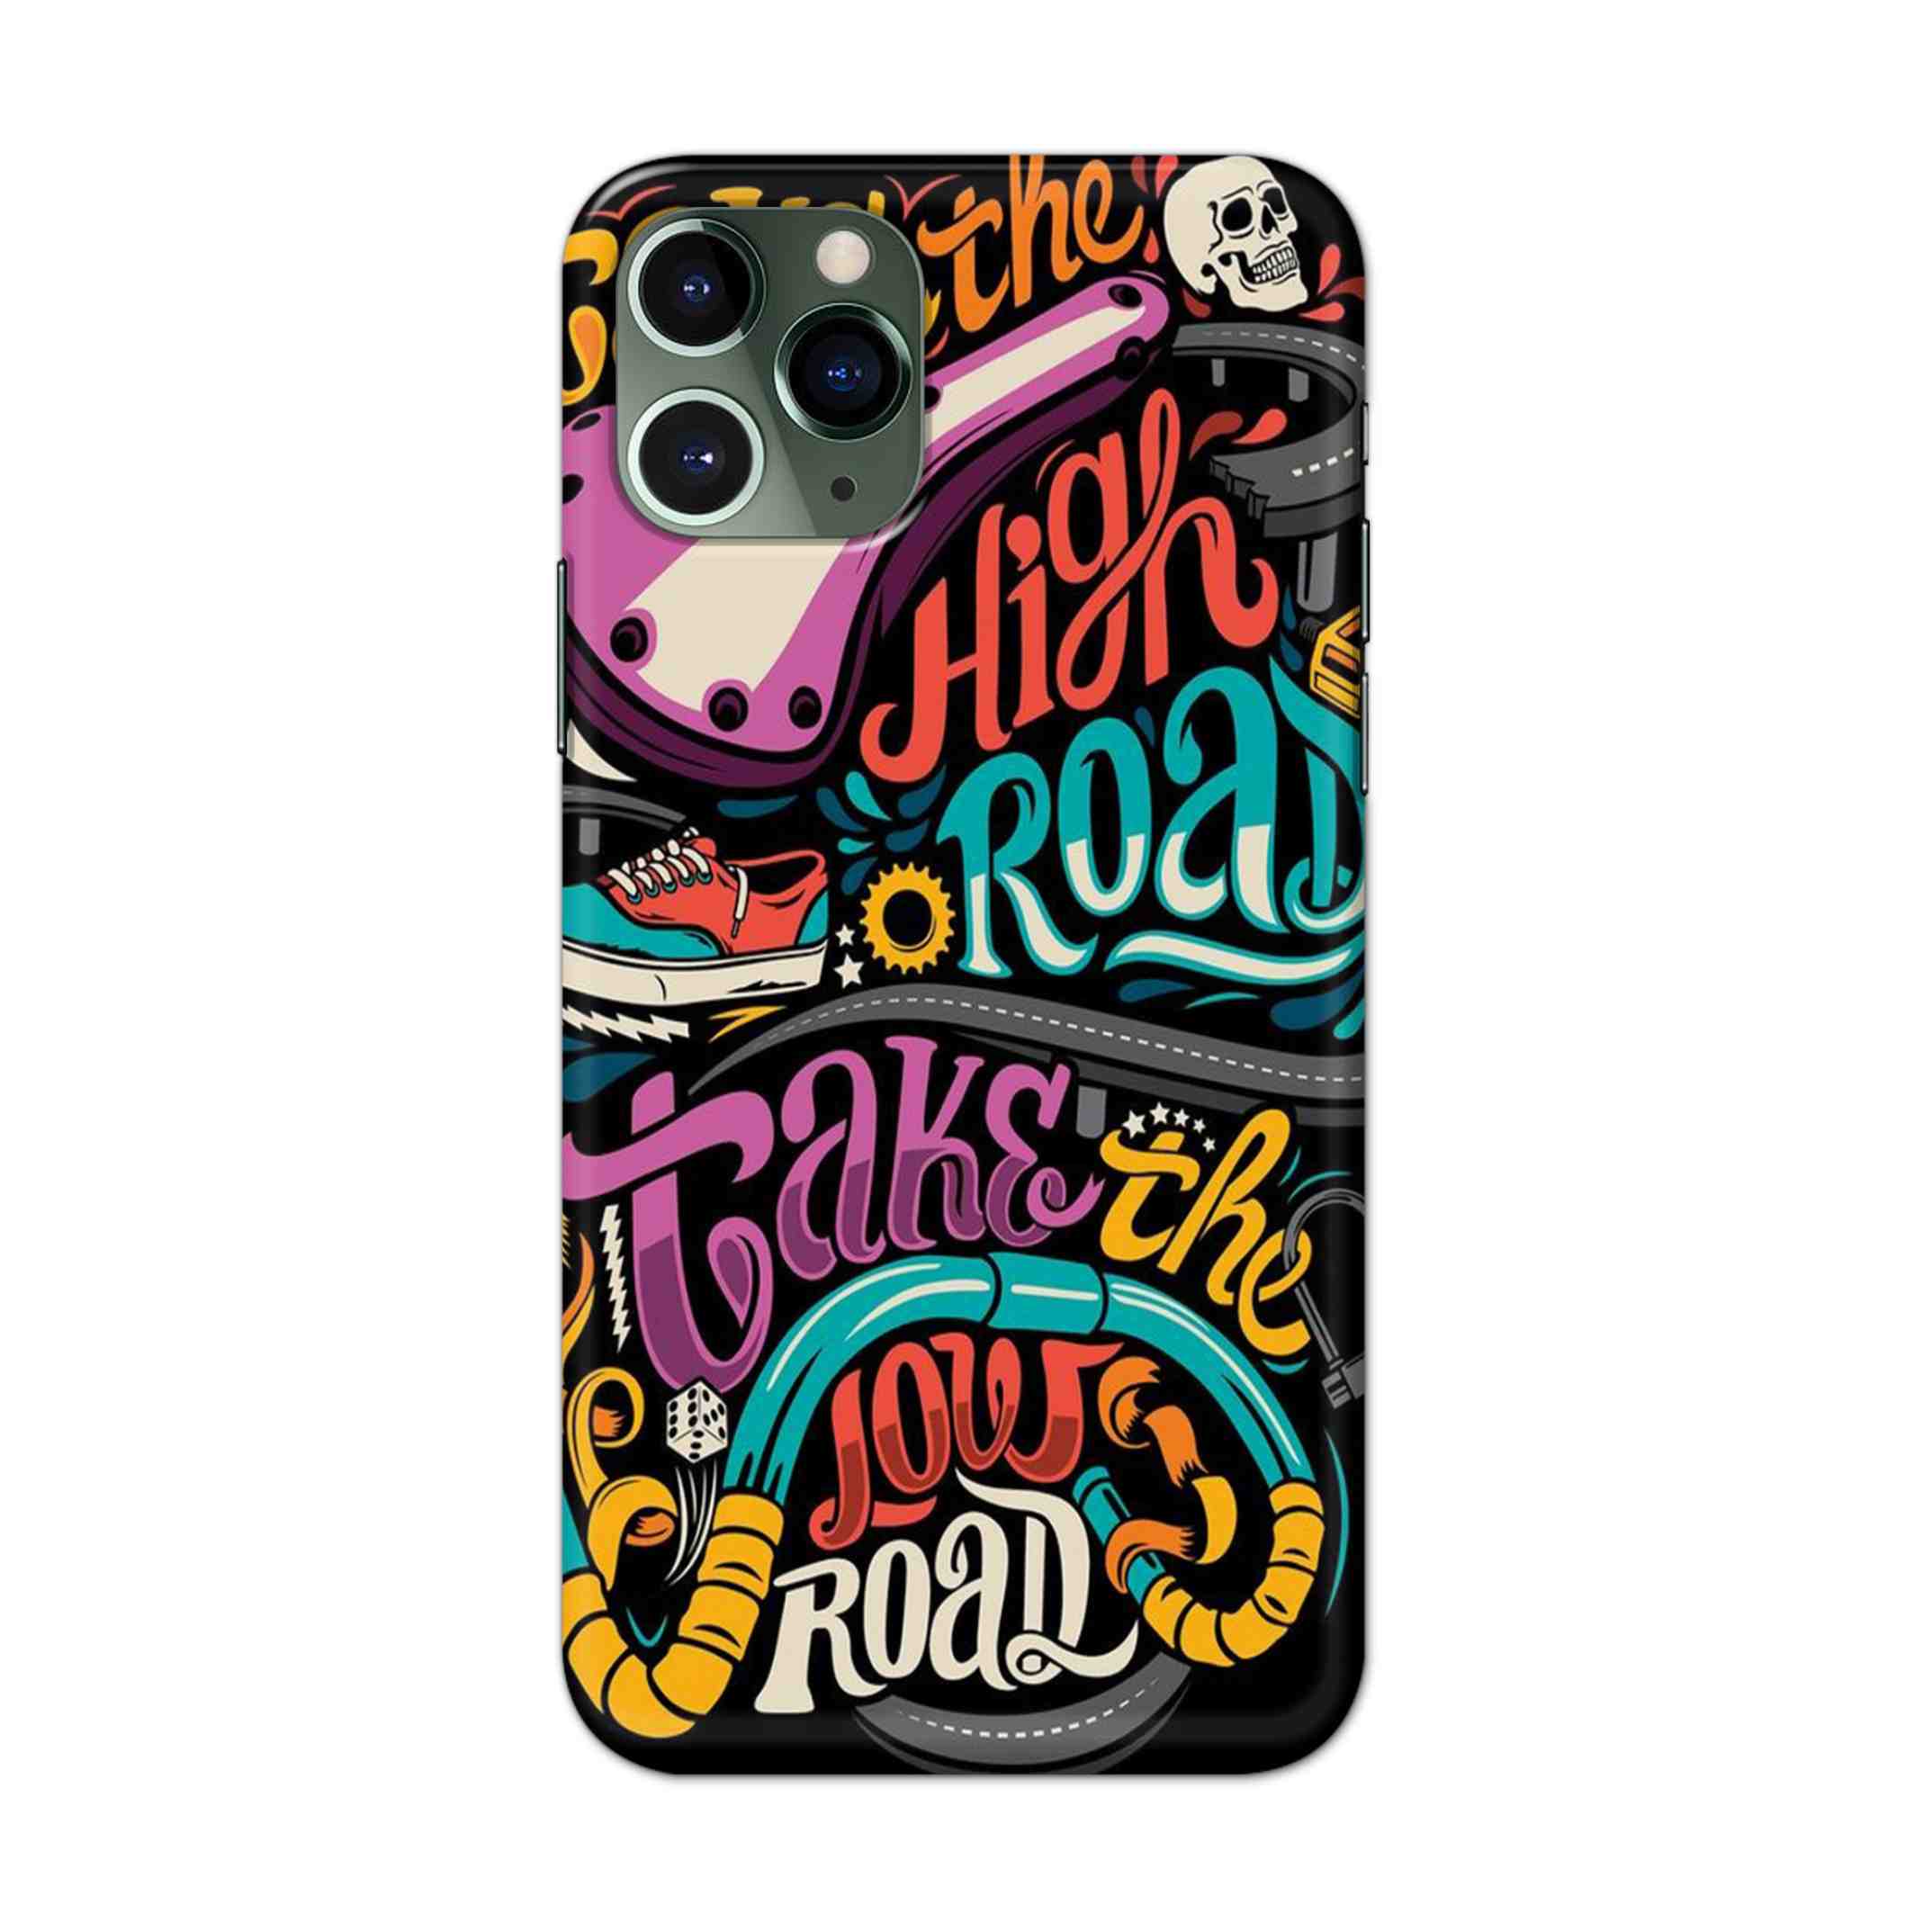 Buy Take The High Road Hard Back Mobile Phone Case/Cover For iPhone 11 Pro Online